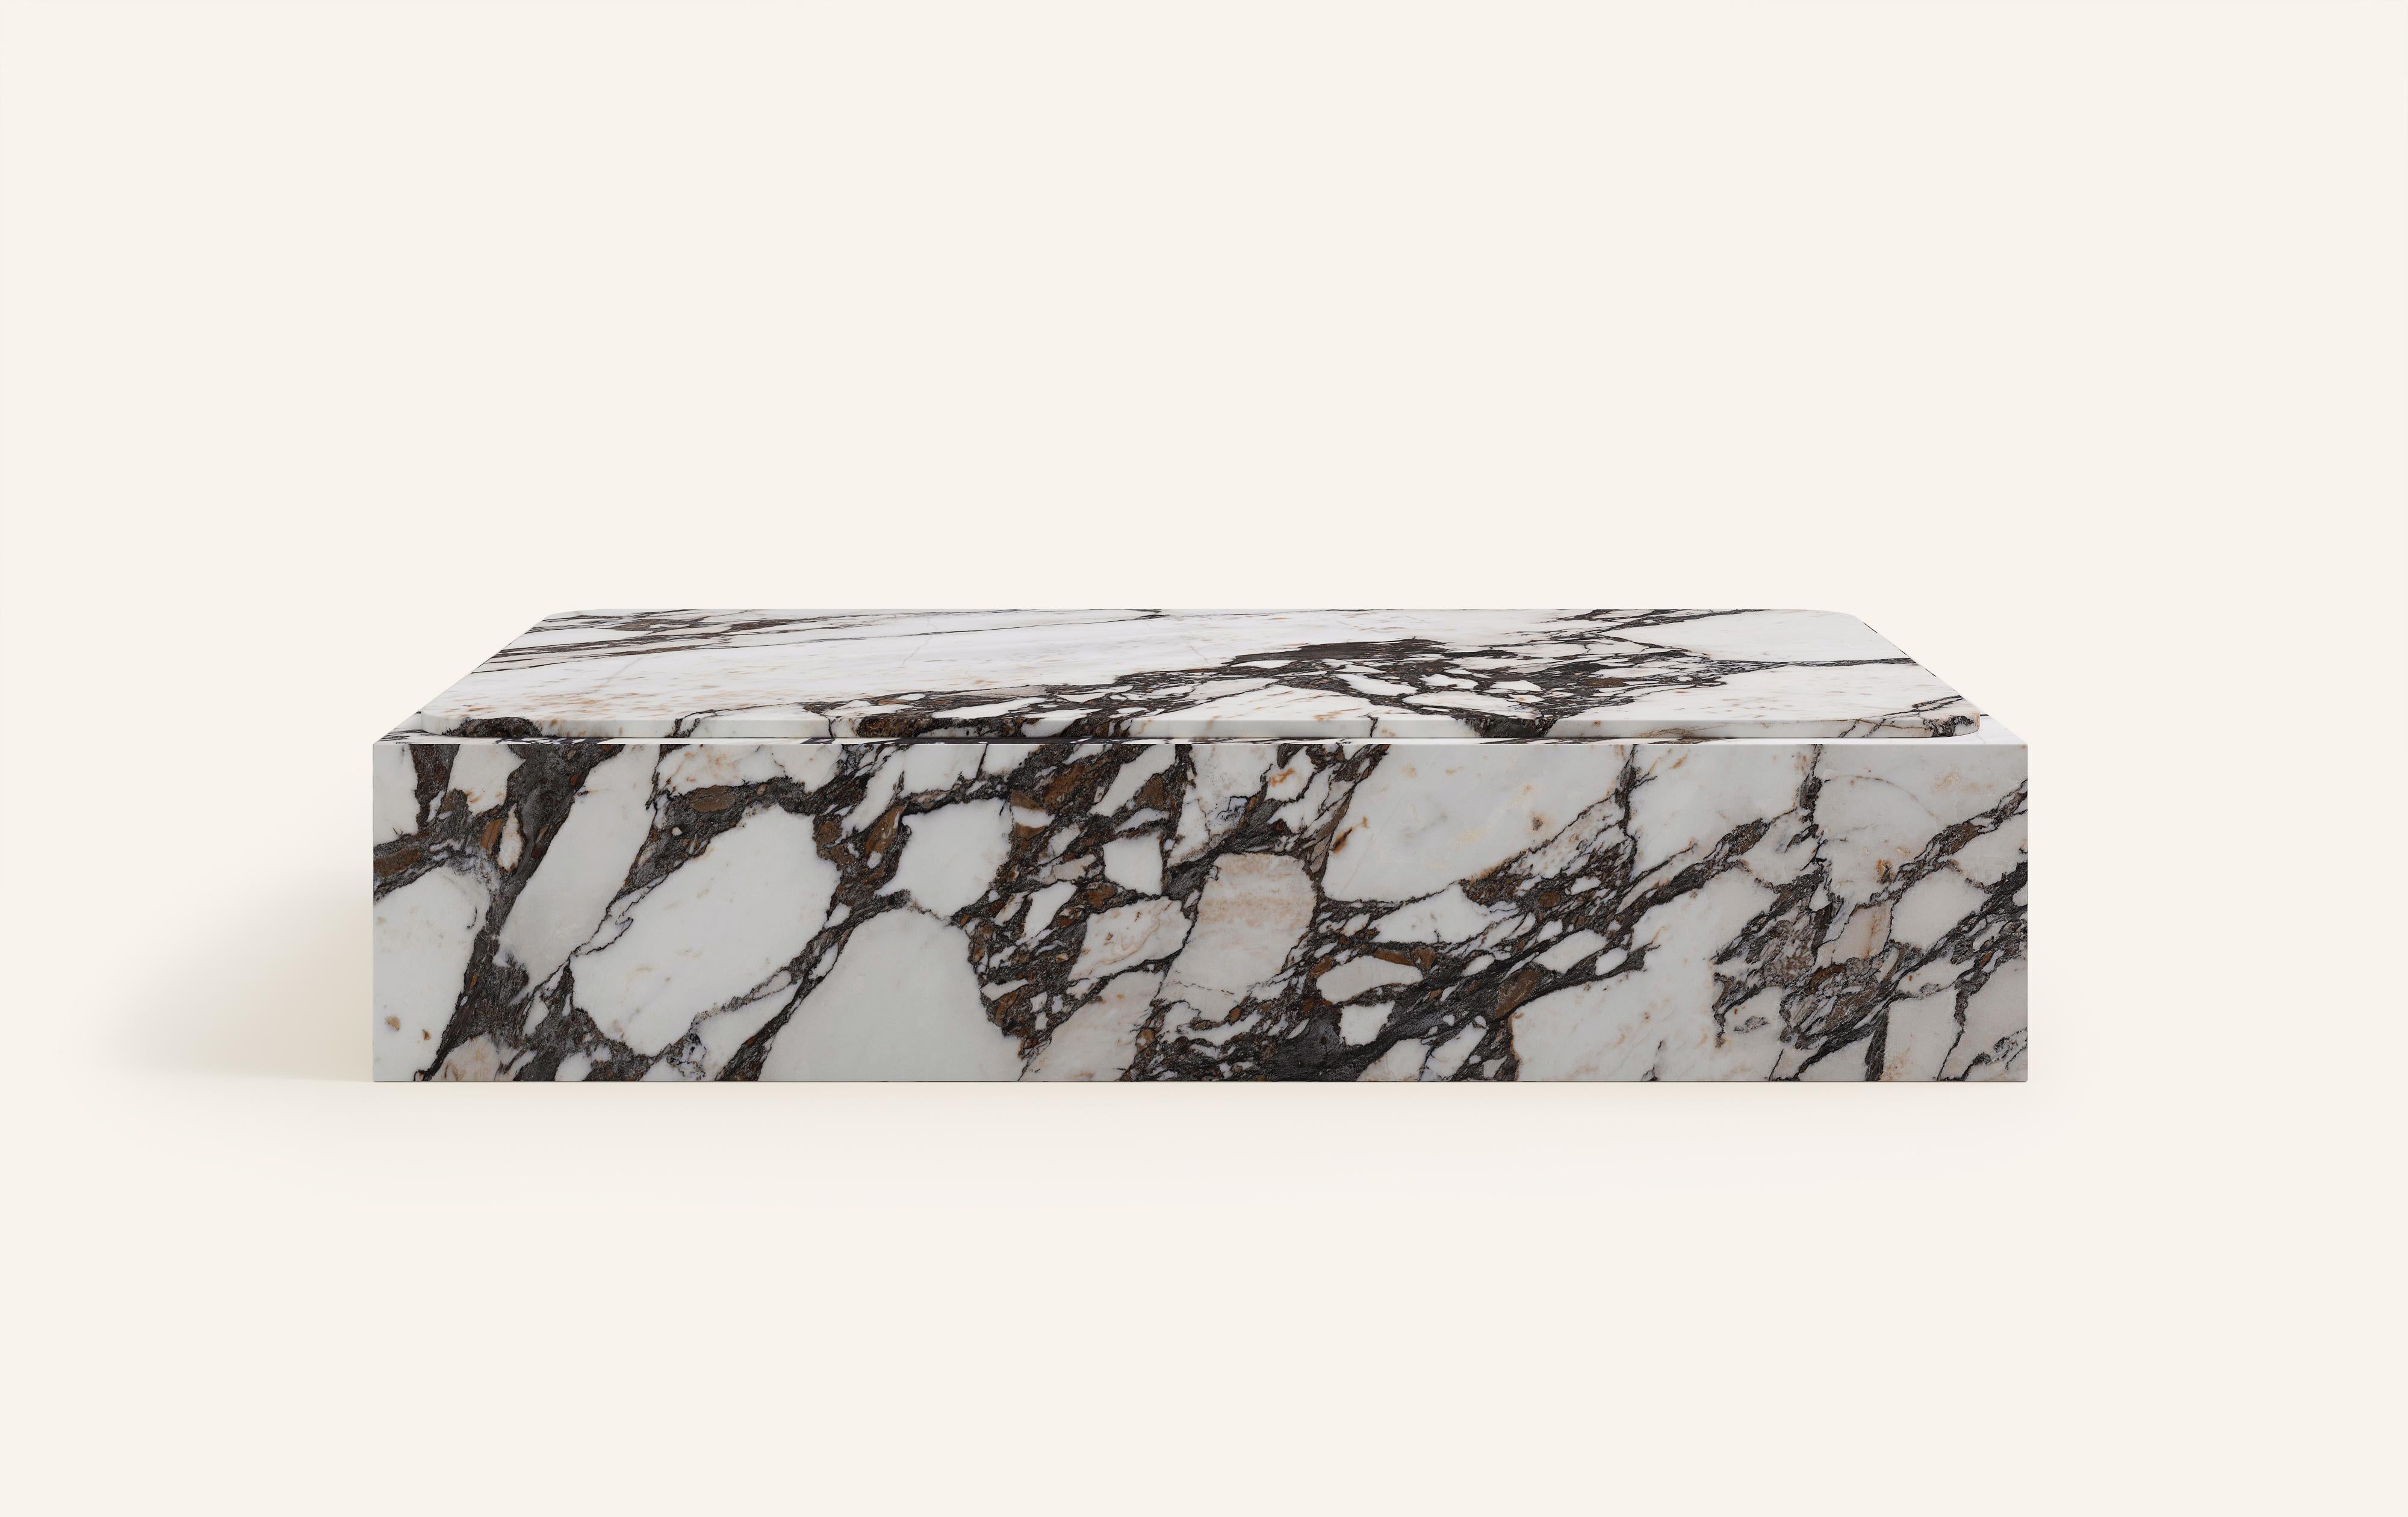 MONOLITHIC FORMS SOFTENED BY GENTLE EDGES. WITH ITS BOLD MARBLE PATTERNS CUBO IS AS VERSATILE AS IT IS STRIKING.

DIMENSIONS:
48”L x 30”W x 13”H: 
- 3/4